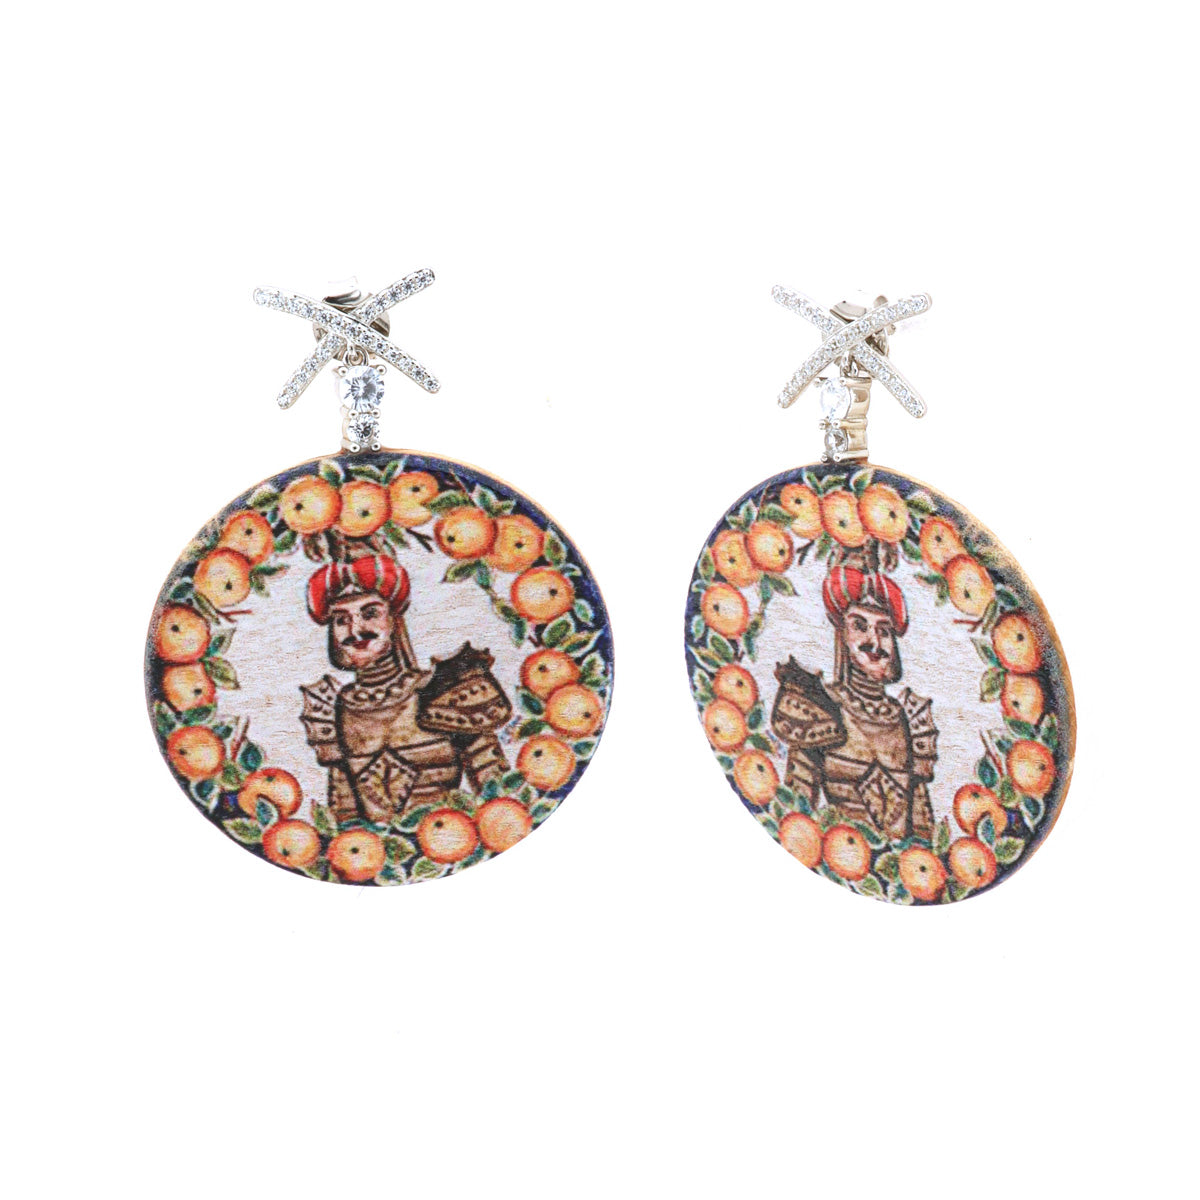 925 silver earrings in pendant wood with typical Sicilian print embellished with white zirconi